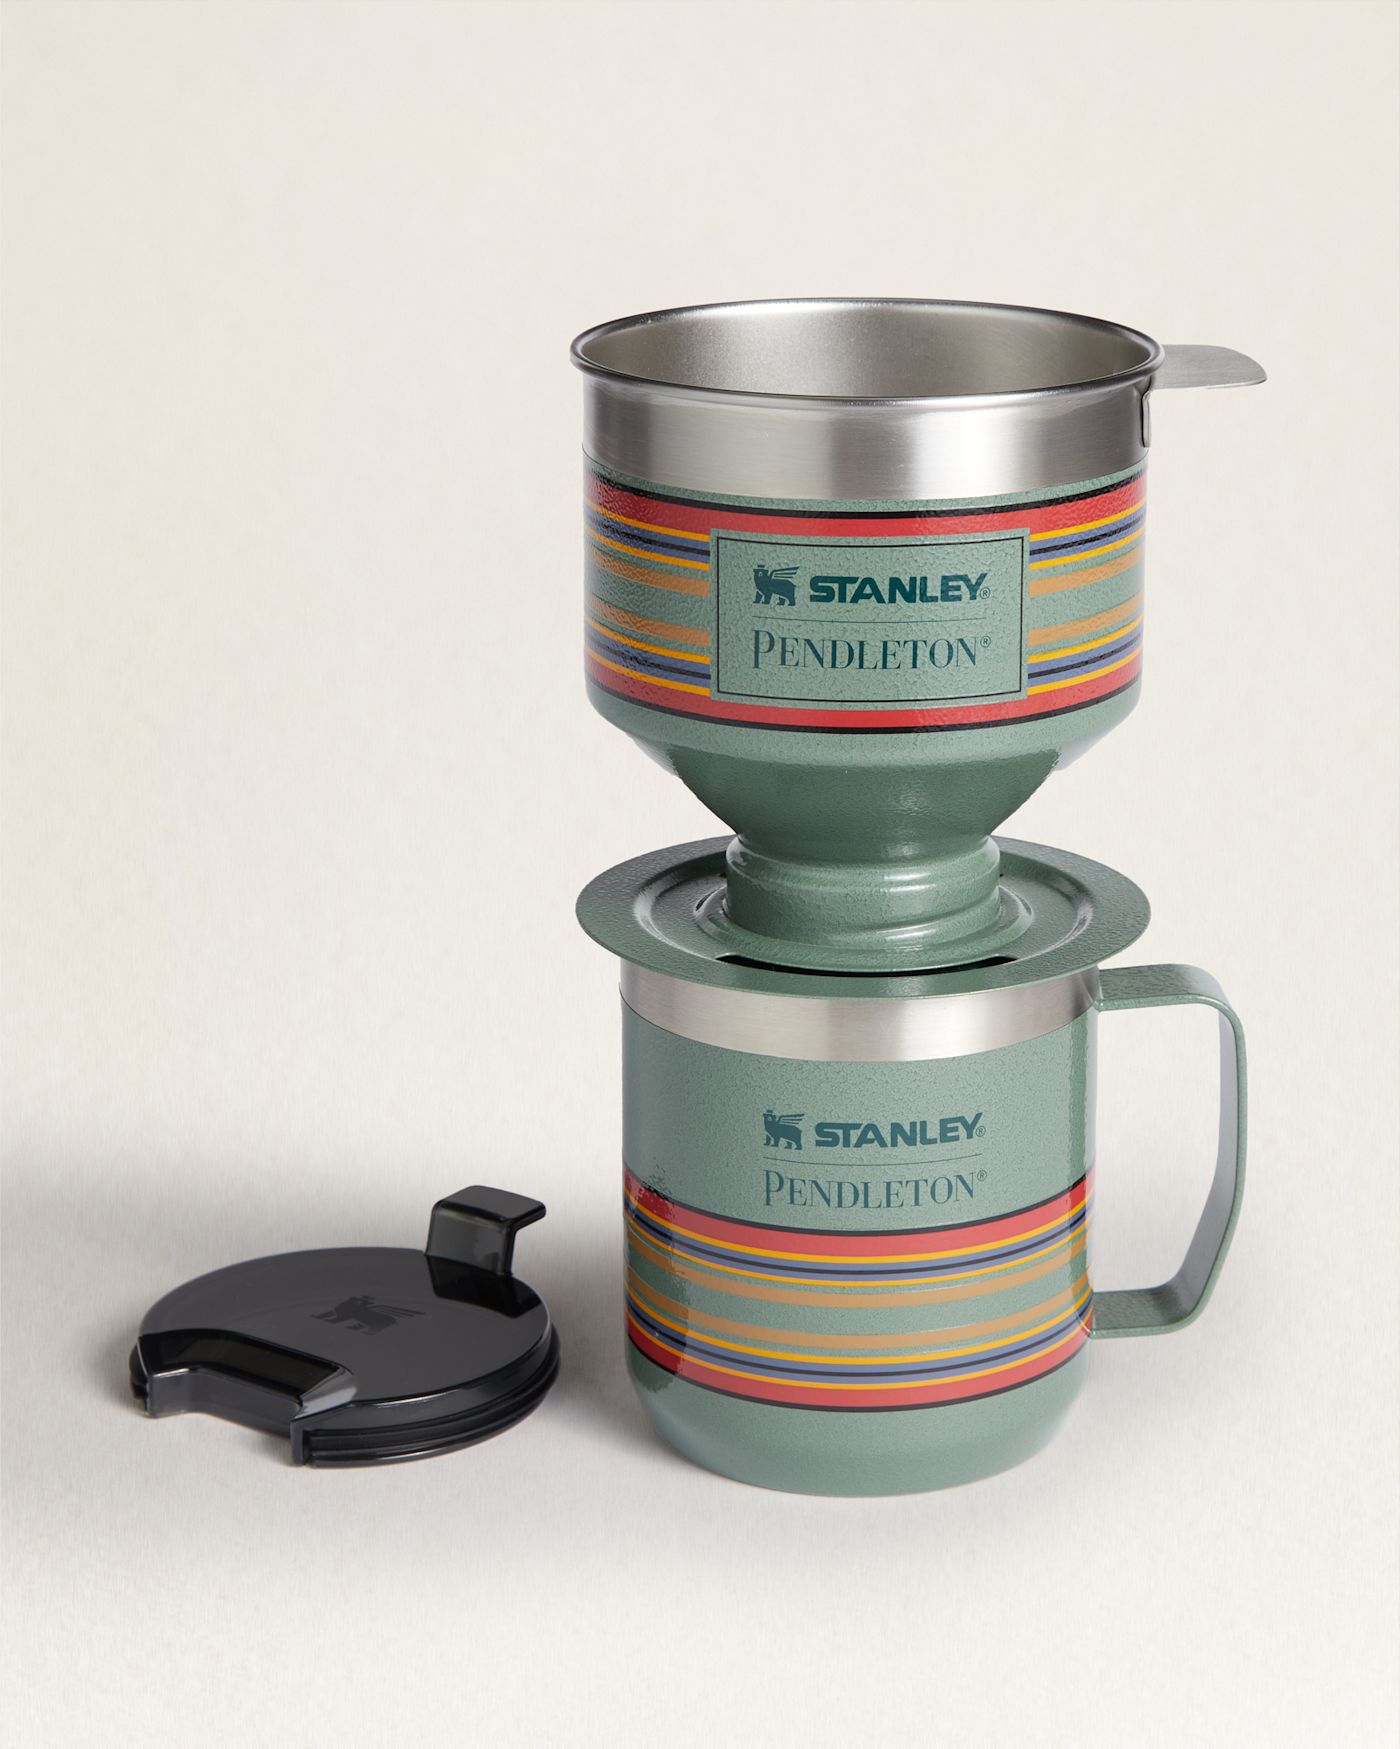 Stanley Collaborated With Pendleton On New Stylish, Outdoorsy Drinkware